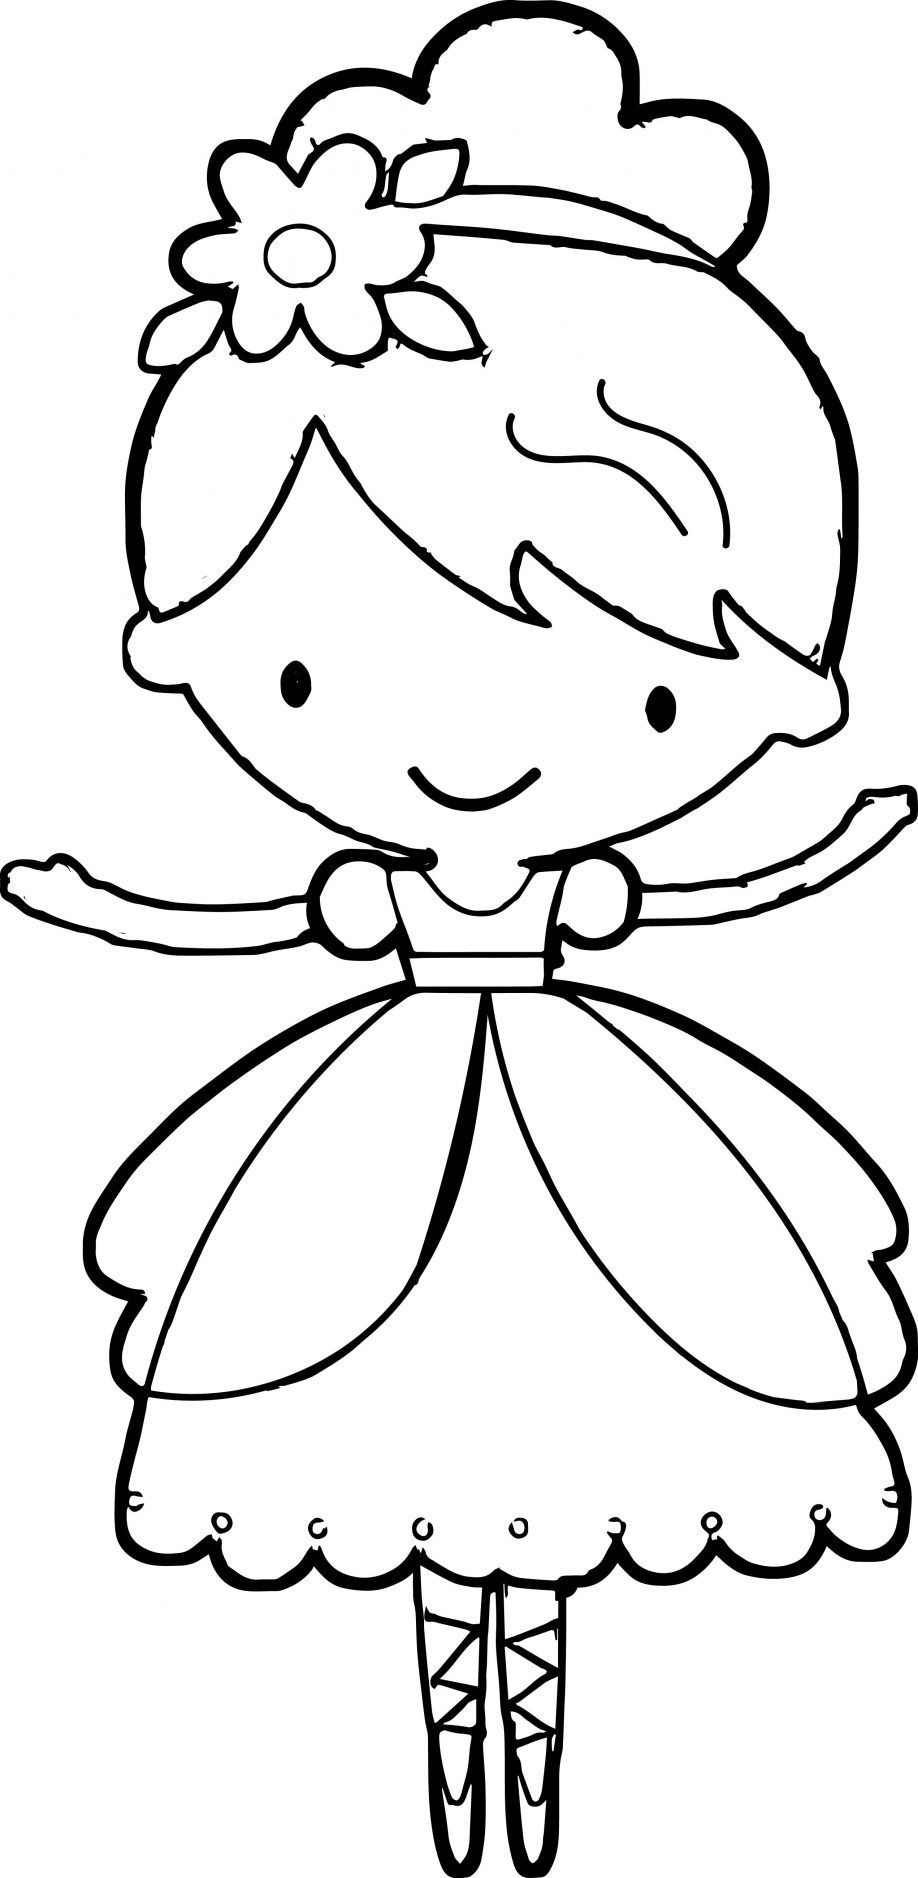 Dance Coloring Pages For Kids
 Ballerina Coloring Pages For Kids at GetDrawings